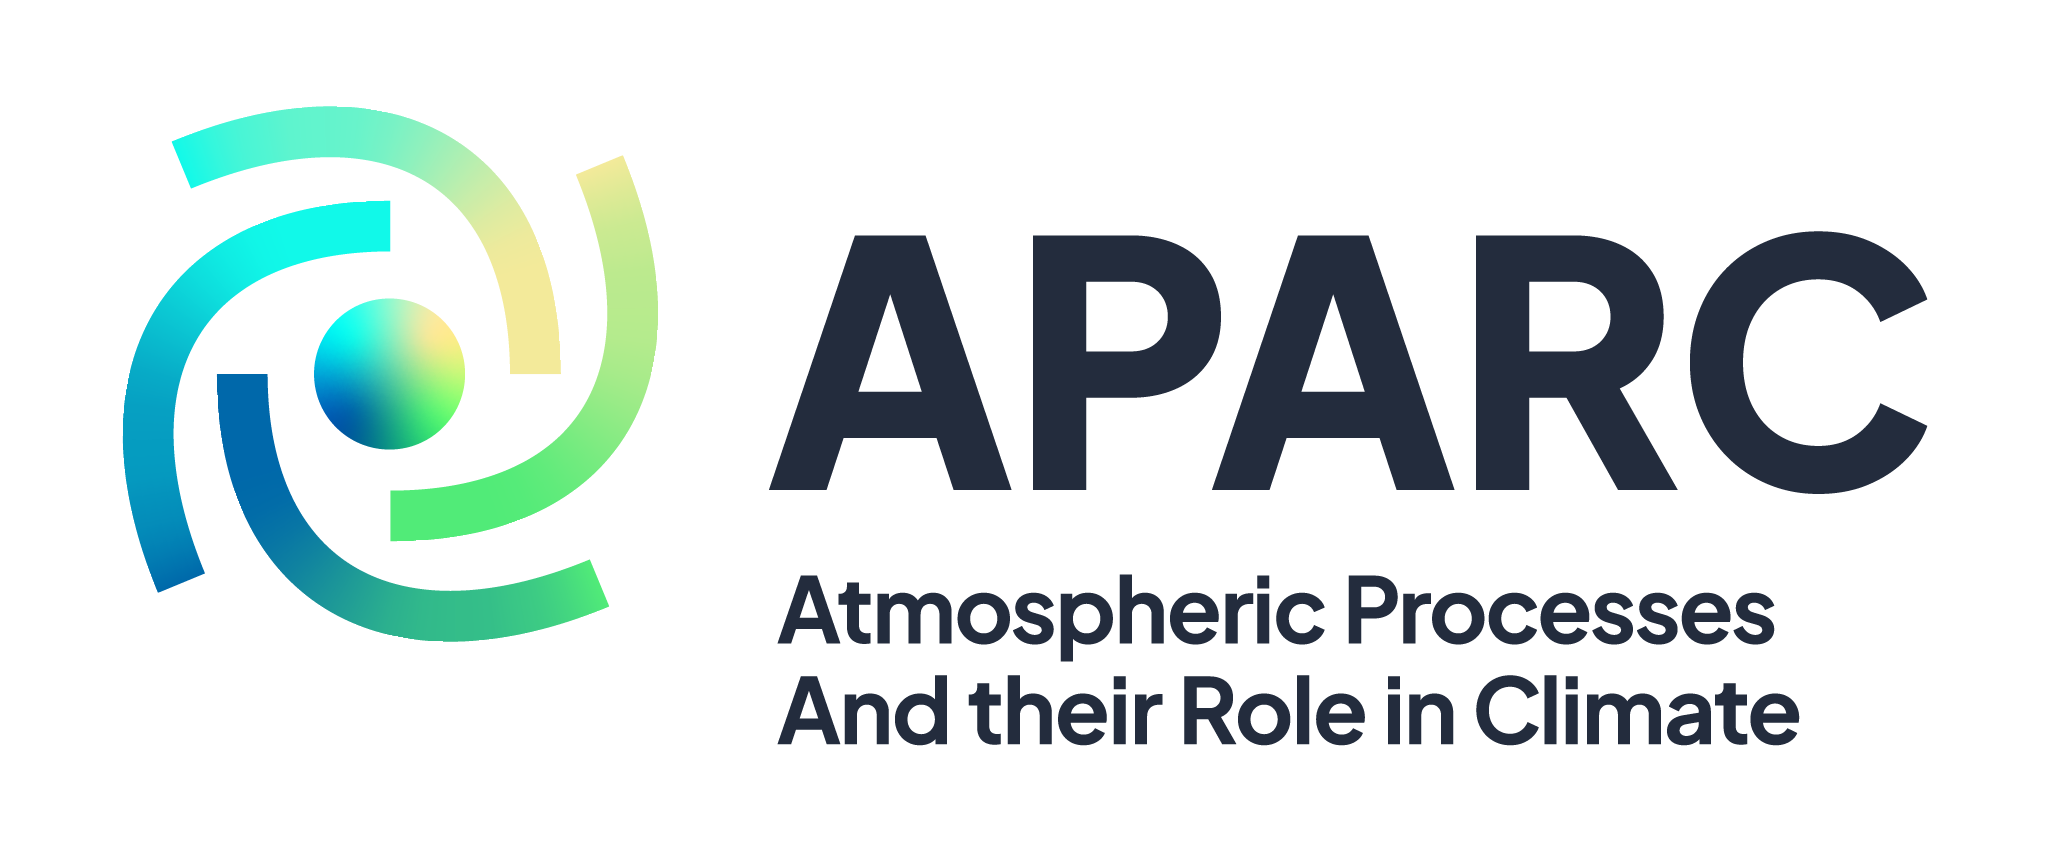 Atmospheric Processes And their Role in Climate (APARC)